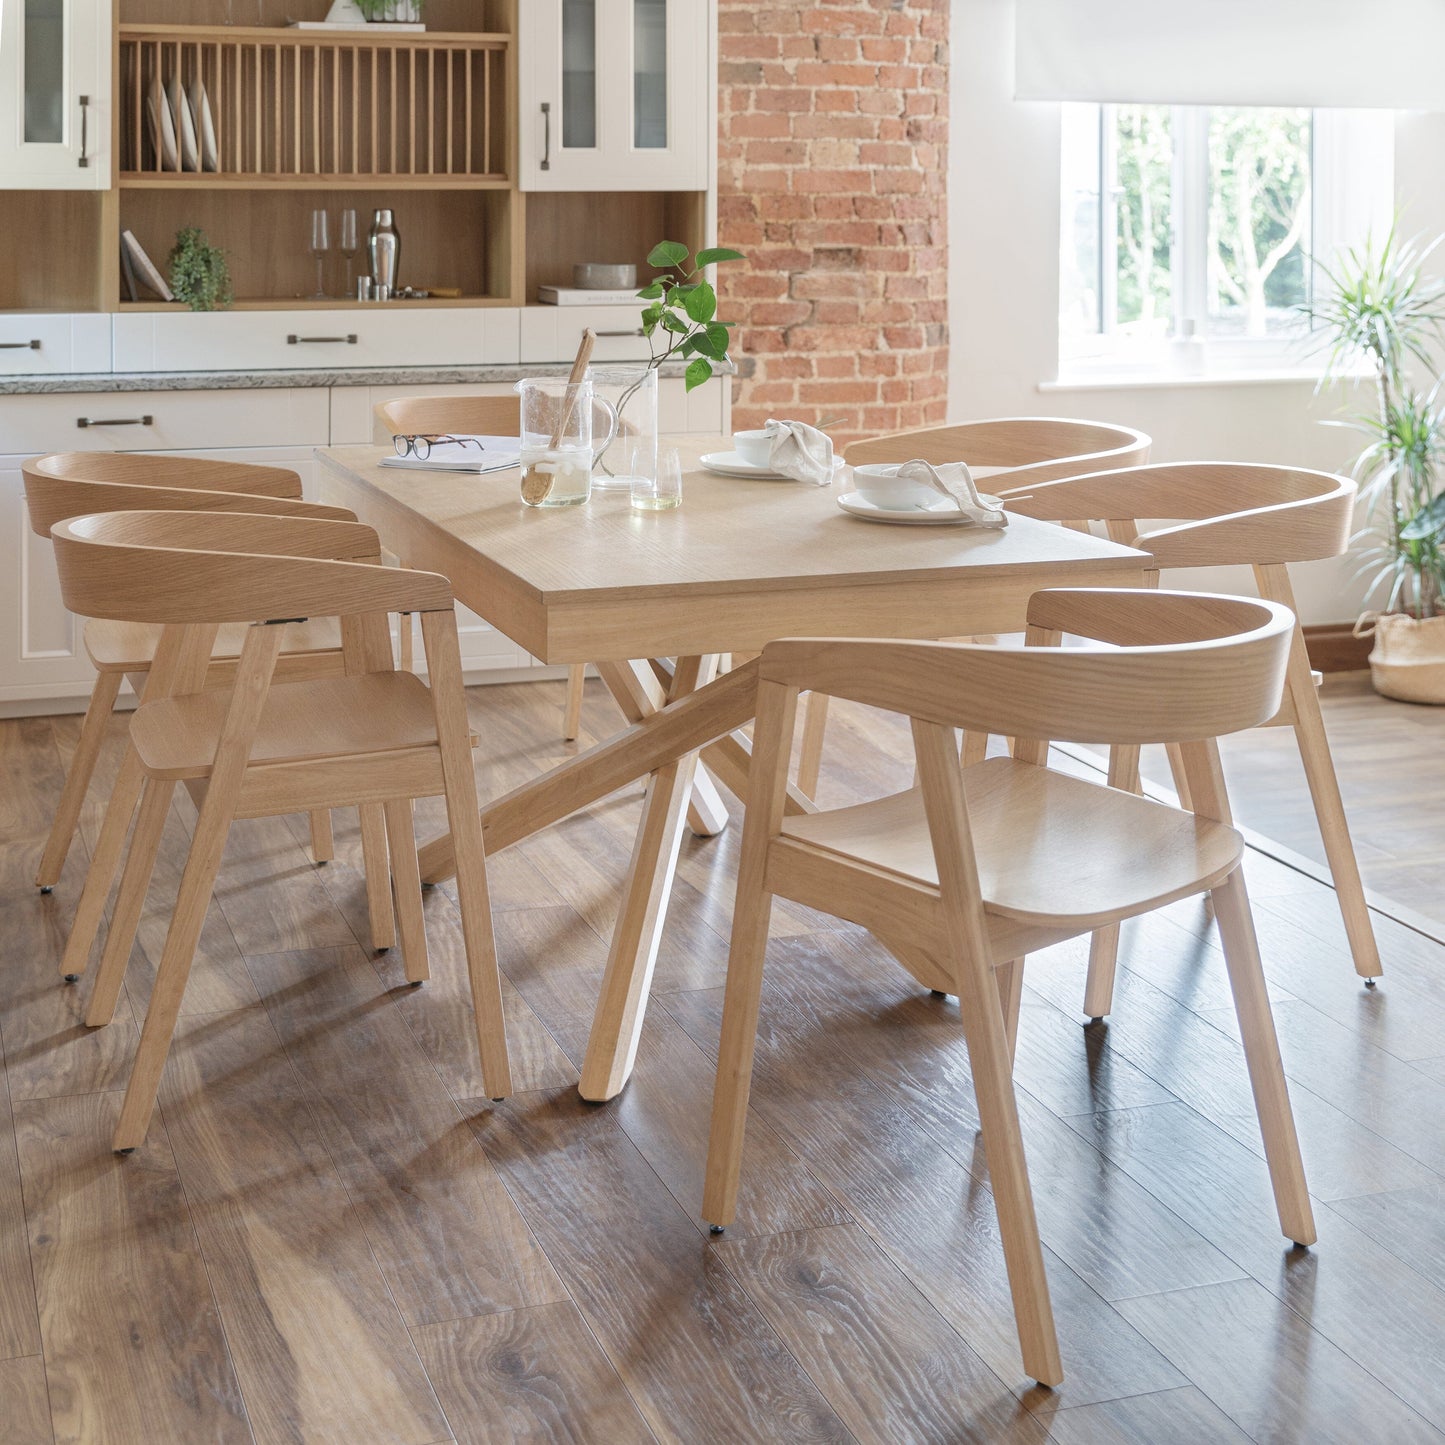 Amelia Whitewash dining table - 6 seater - Ella Pale Oak wooden chairs - Laura James